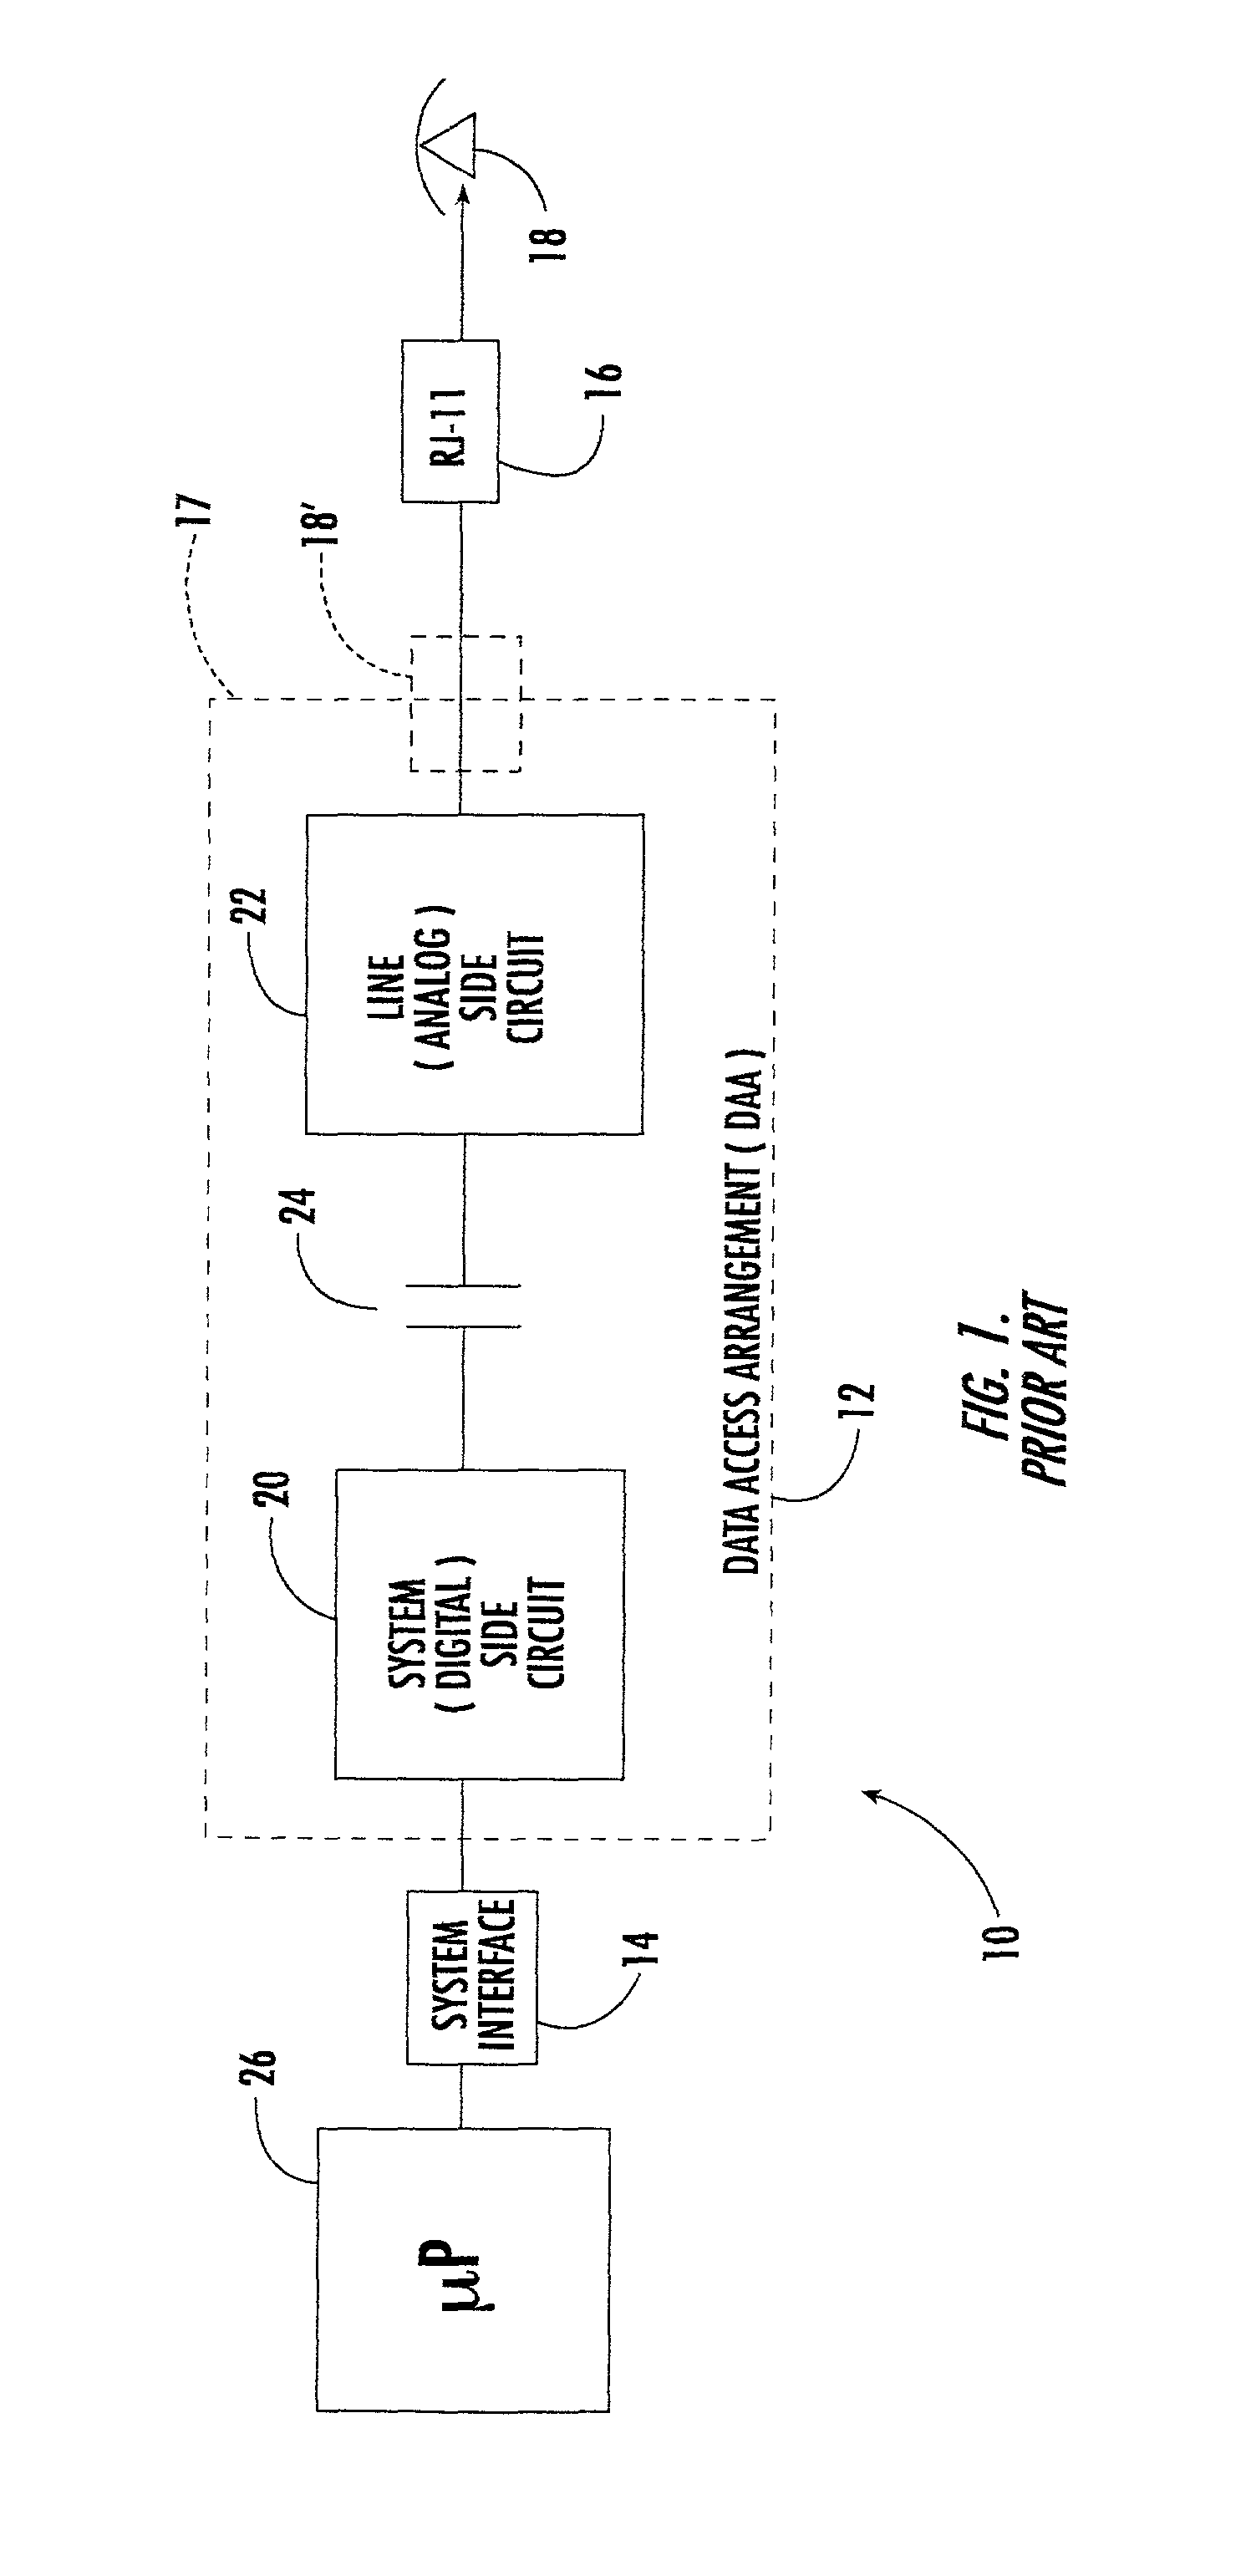 Jack module with integrated modem interface circuits